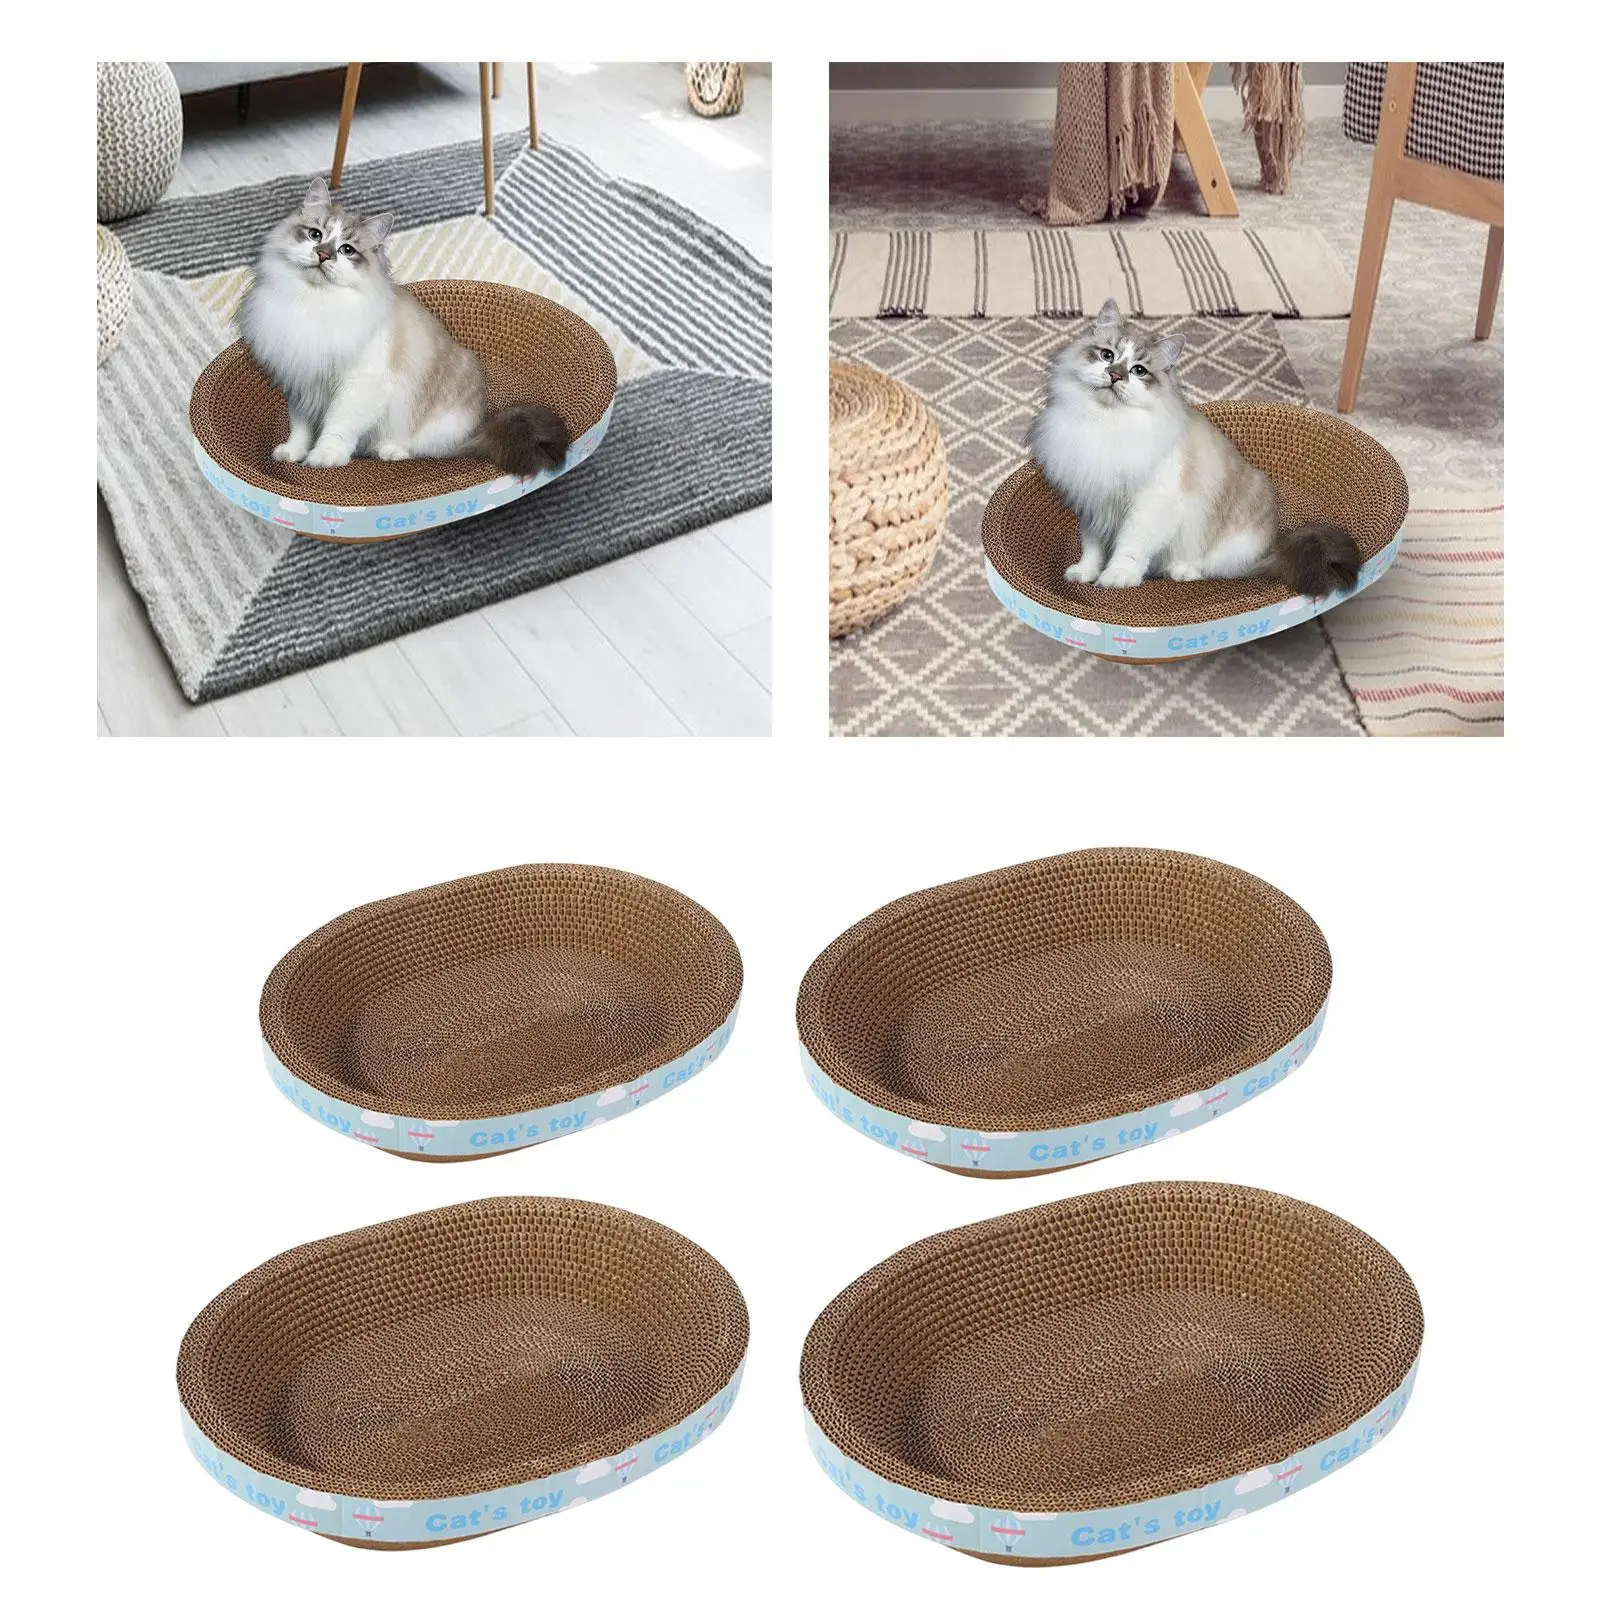 Oval Corrugated Cat Scratcher Lounge Bed with Durable Cardboard for 